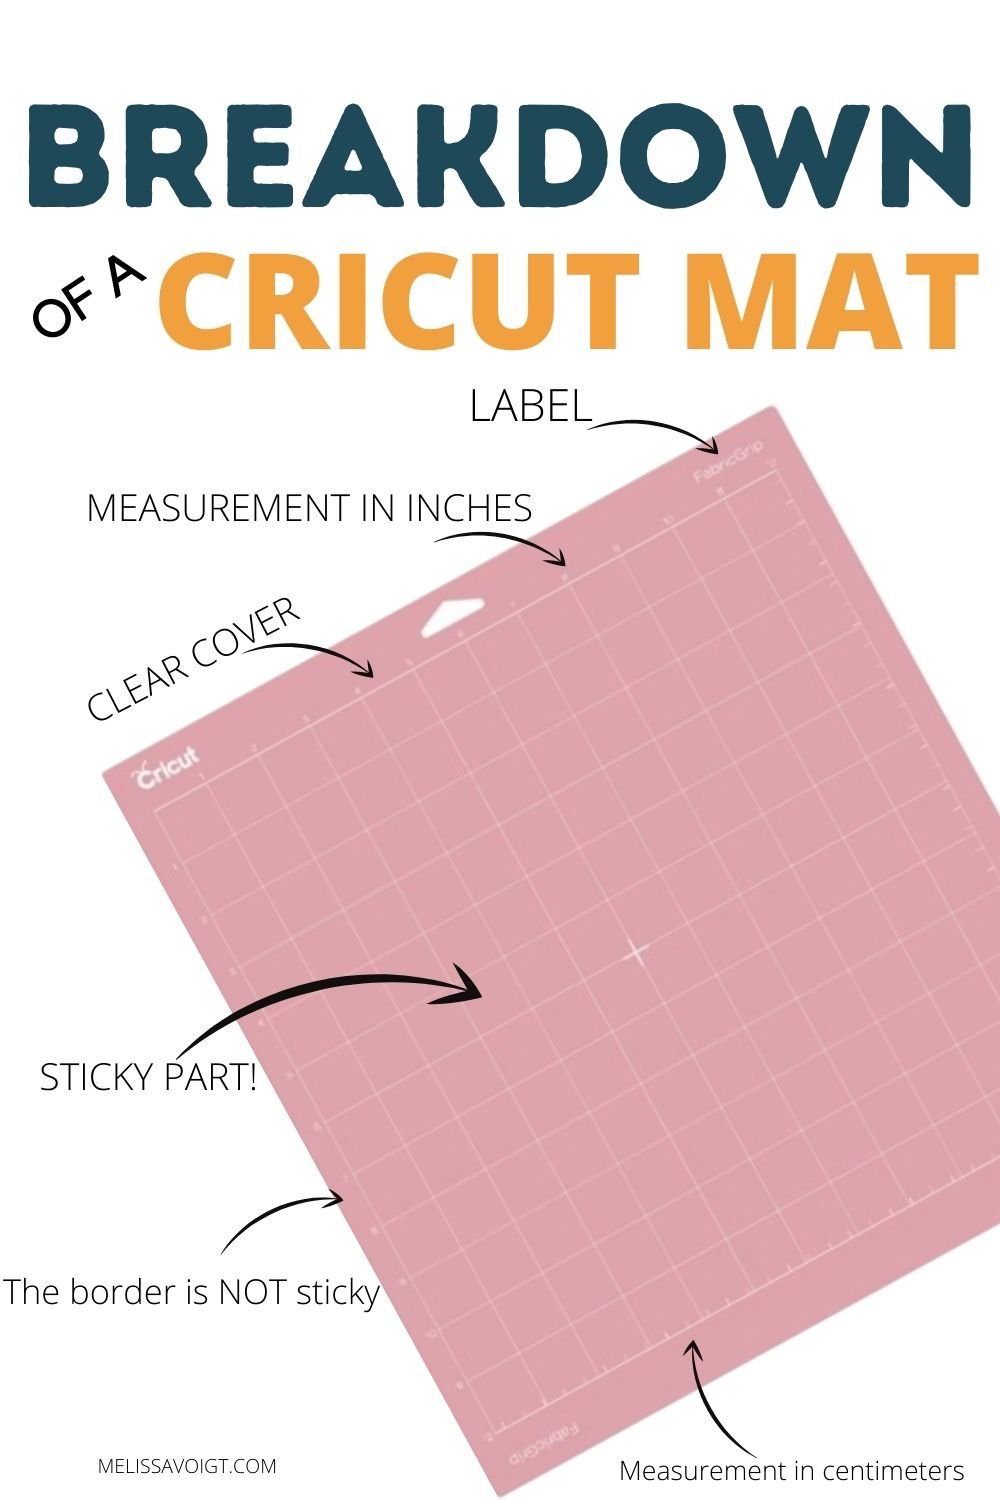 Which Cricut machine mat should you use for your project? – Cricut